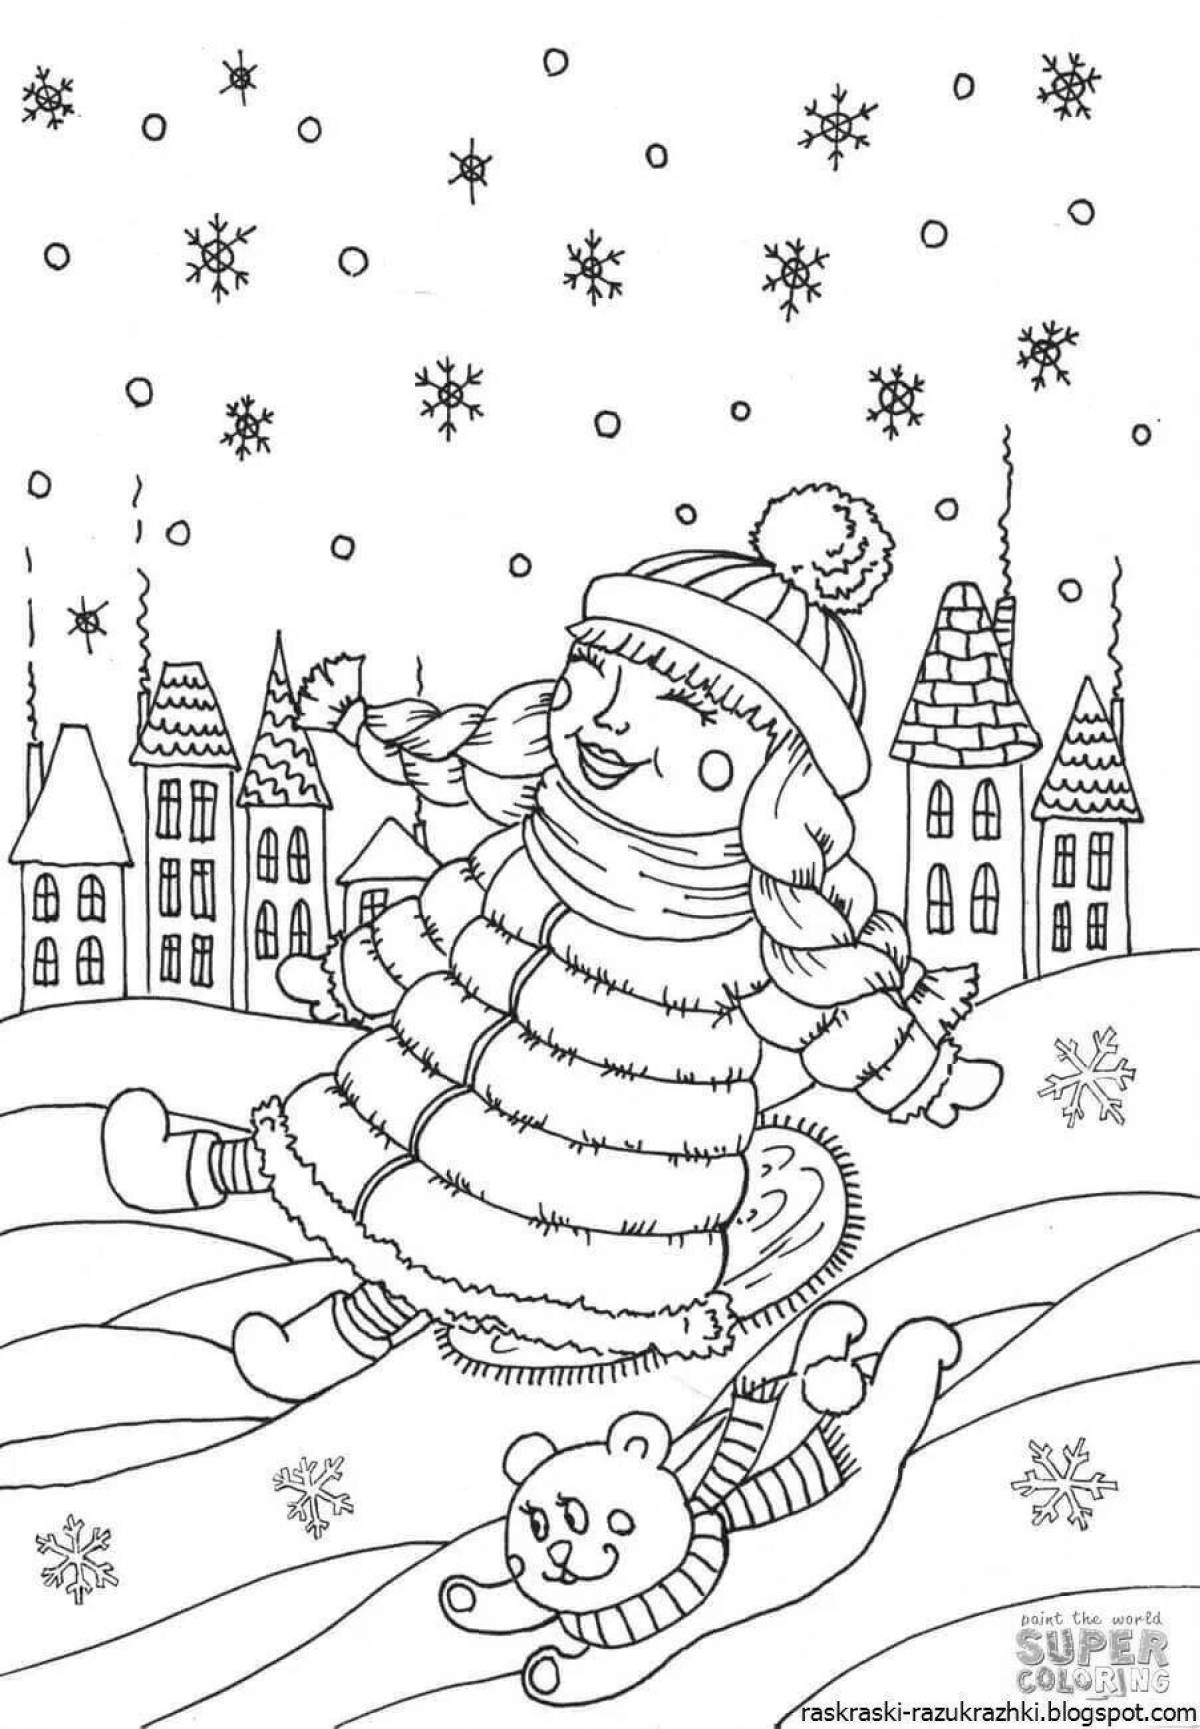 Bright January coloring pages for kids